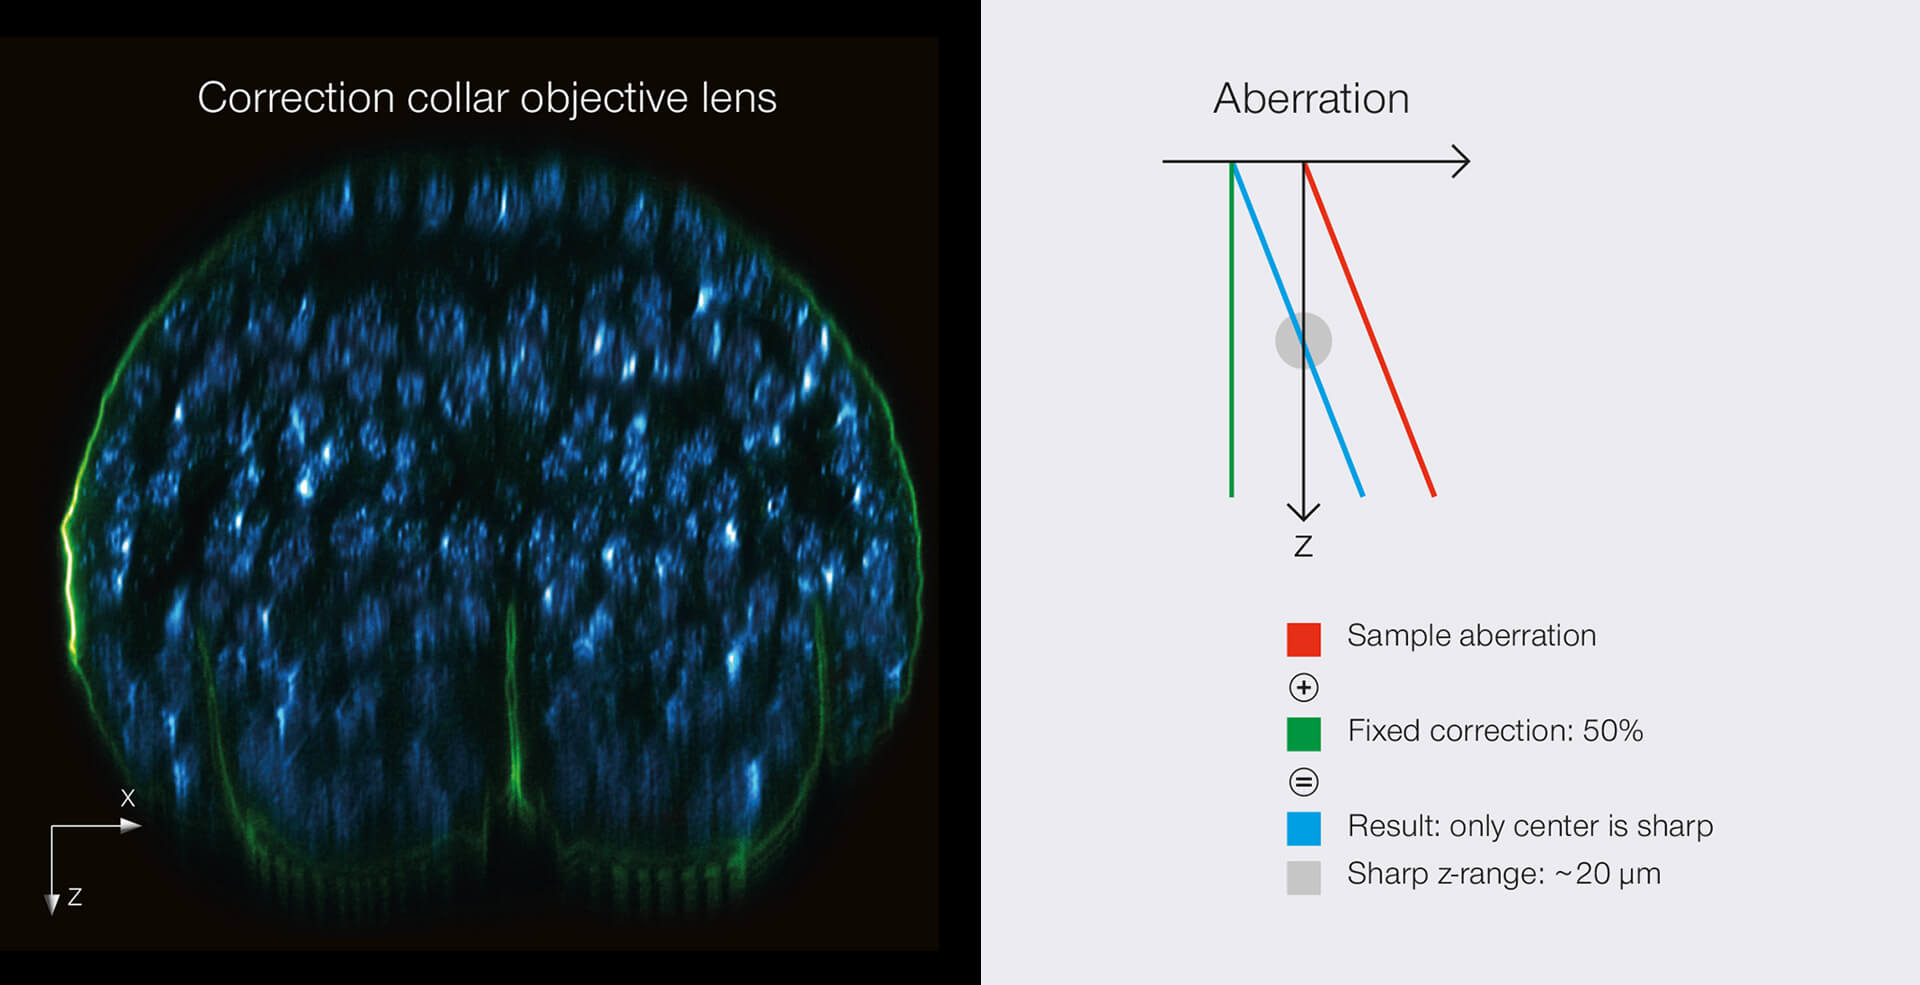 Comparison of RAYSHAPE deformable mirror vs correction collar objective lens. xz section of a stage 17 Drosophila embryo stained for chitin (abberior LIVE 610, green) and DNA (abberior LIVE 550, cyan). Position middle.